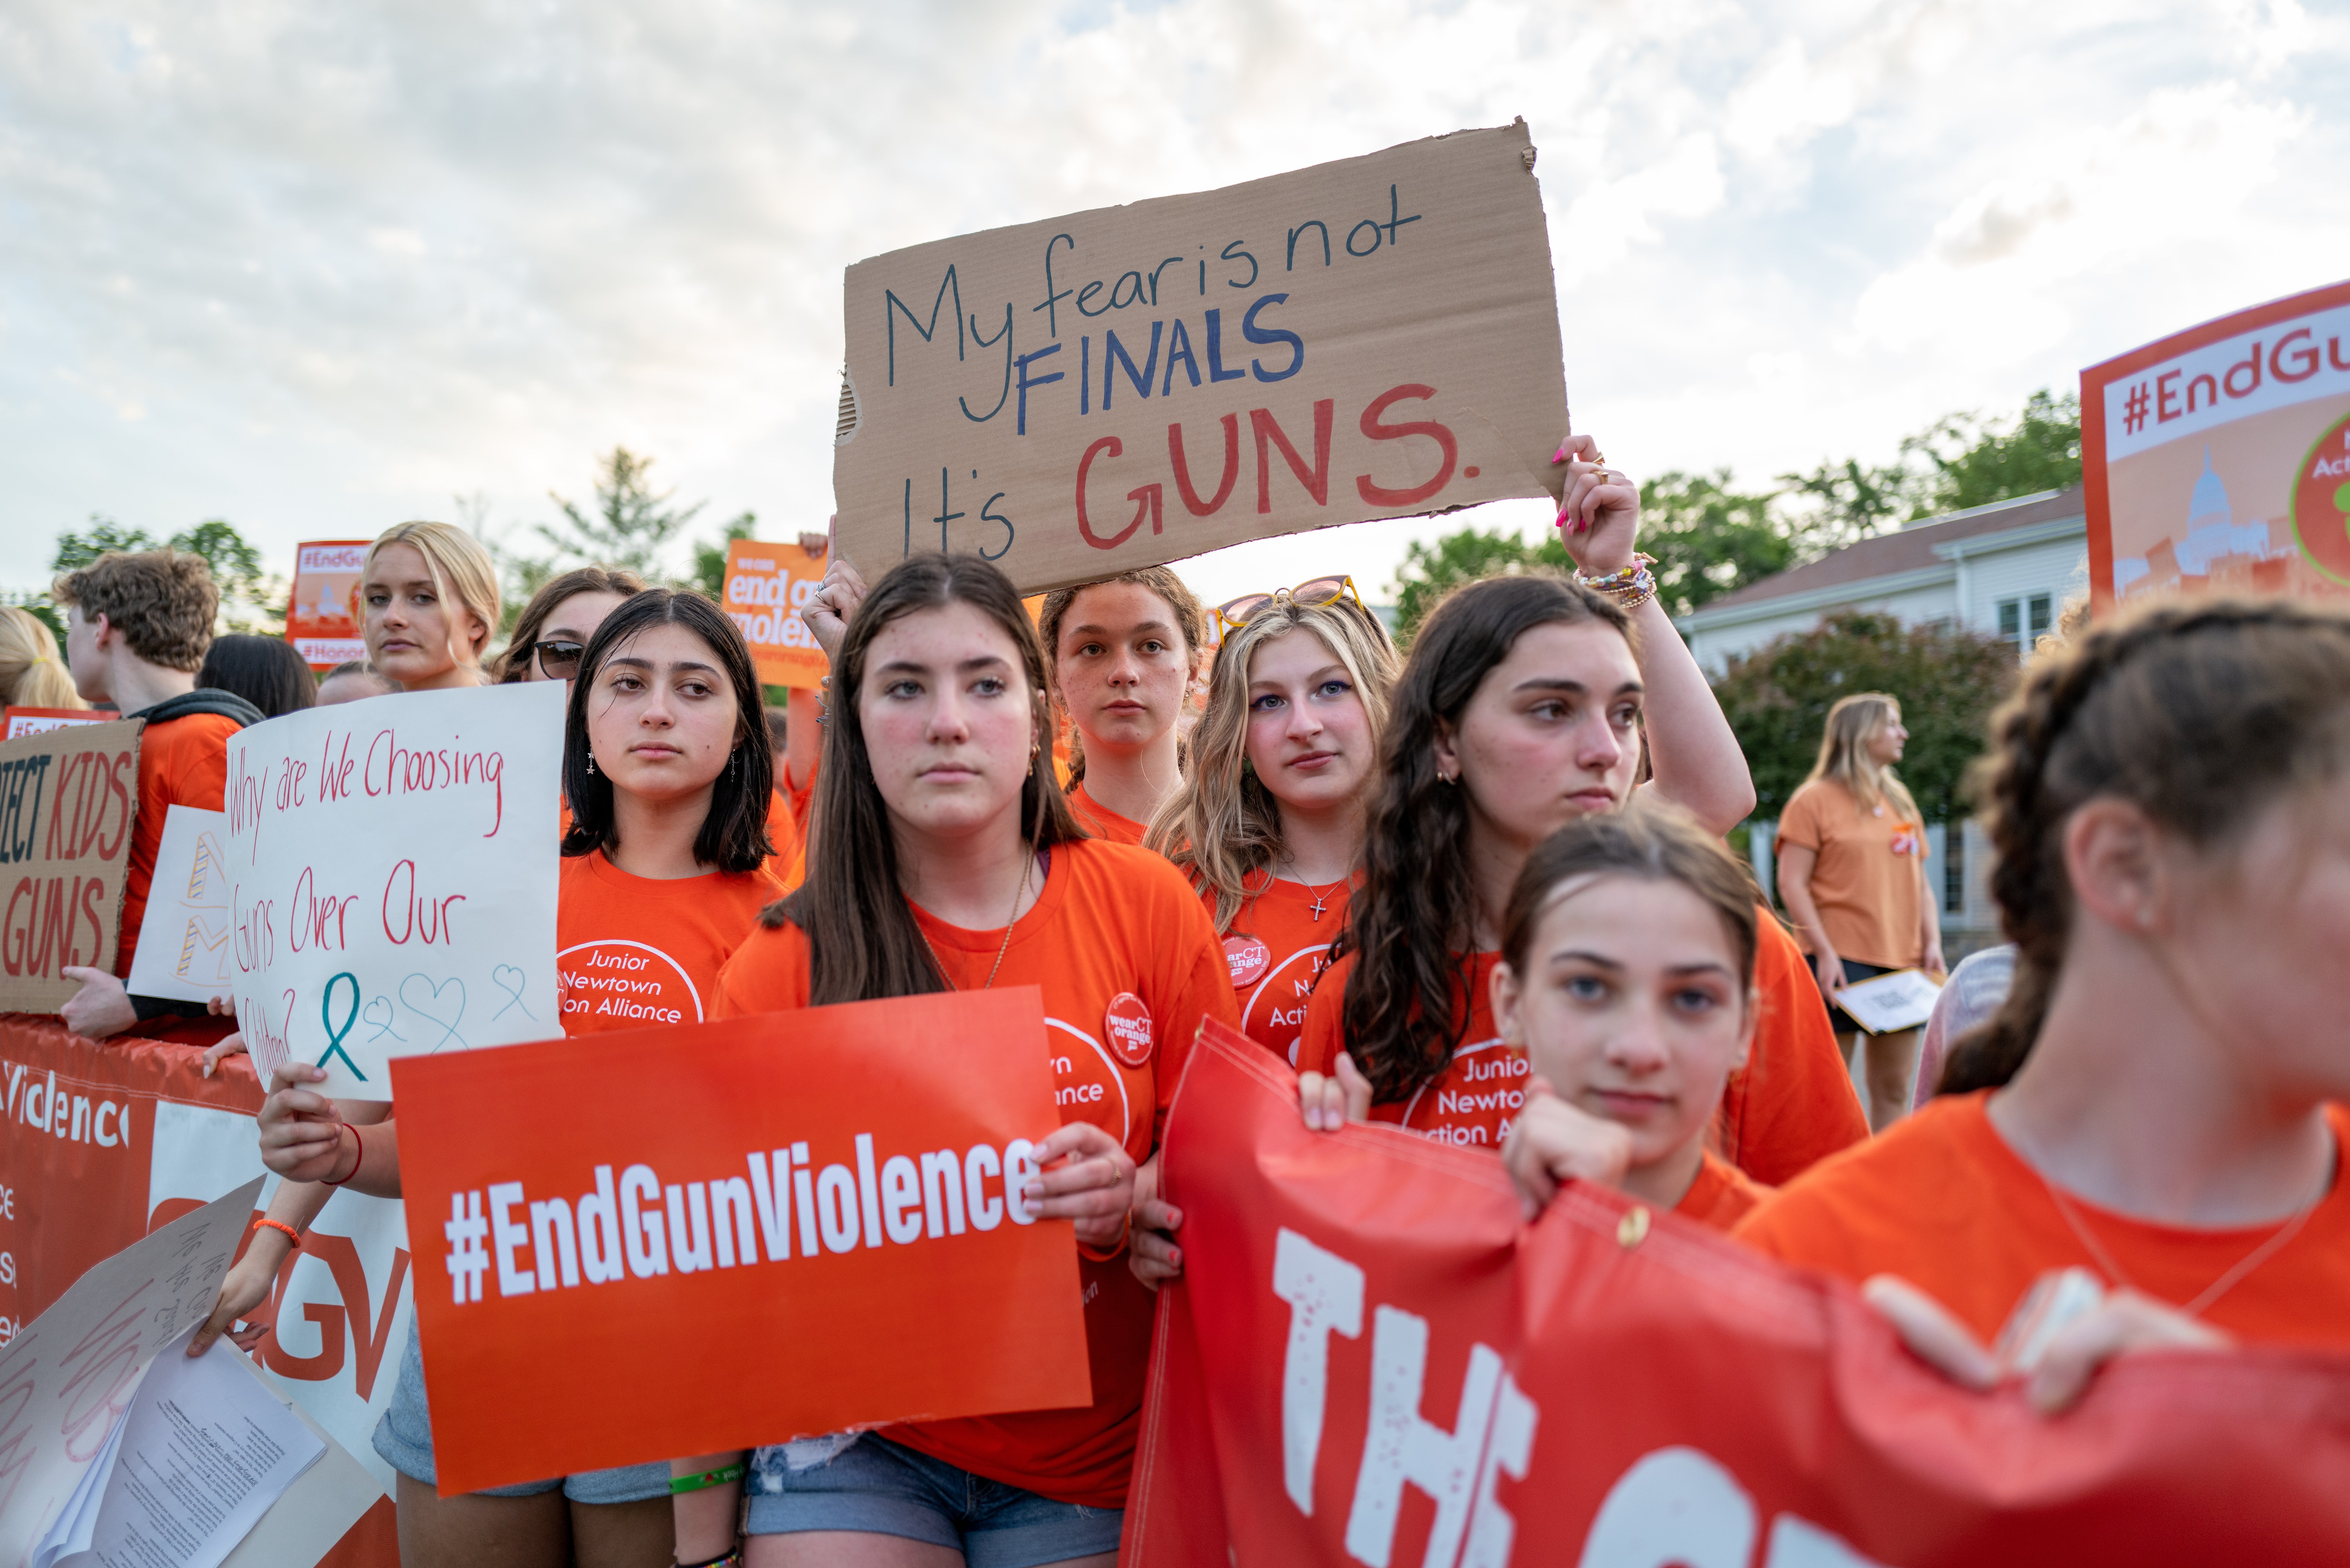 People hold up signs during a rally for National Gun Violence Awareness Day on 3 June